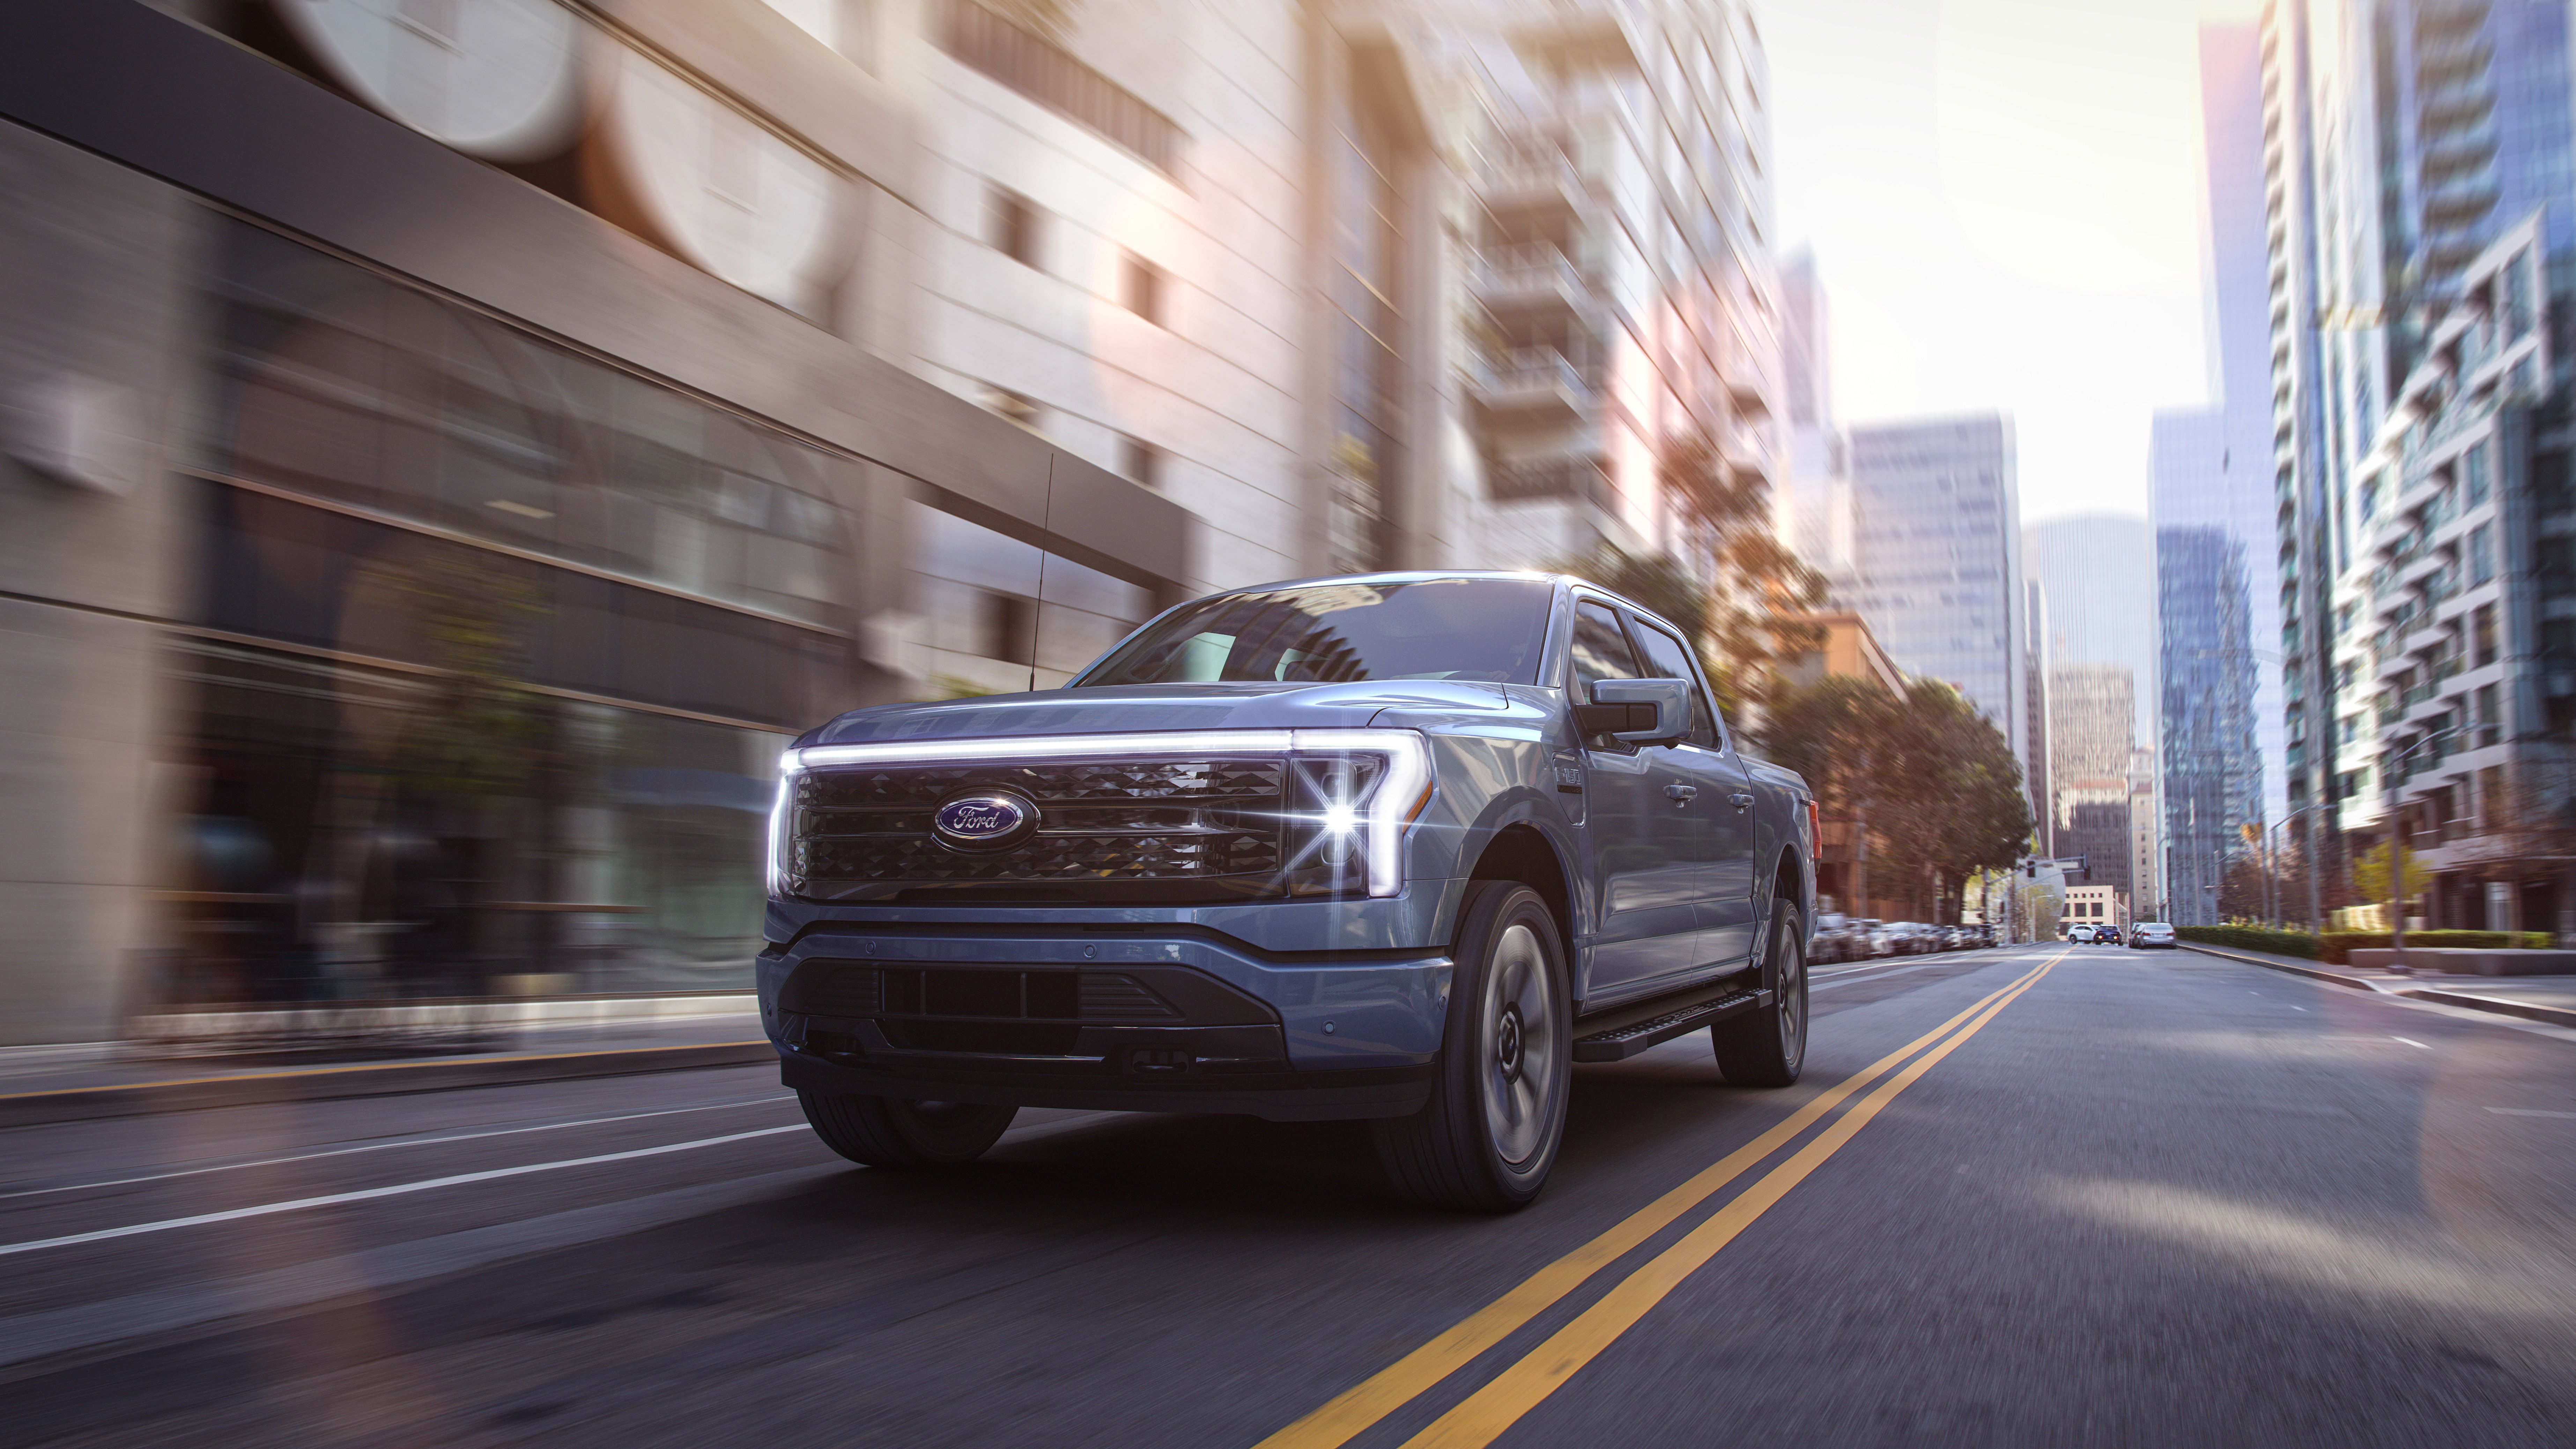 The Ford F-150 Lightning Costs $100,000 - 24/7 Wall St.